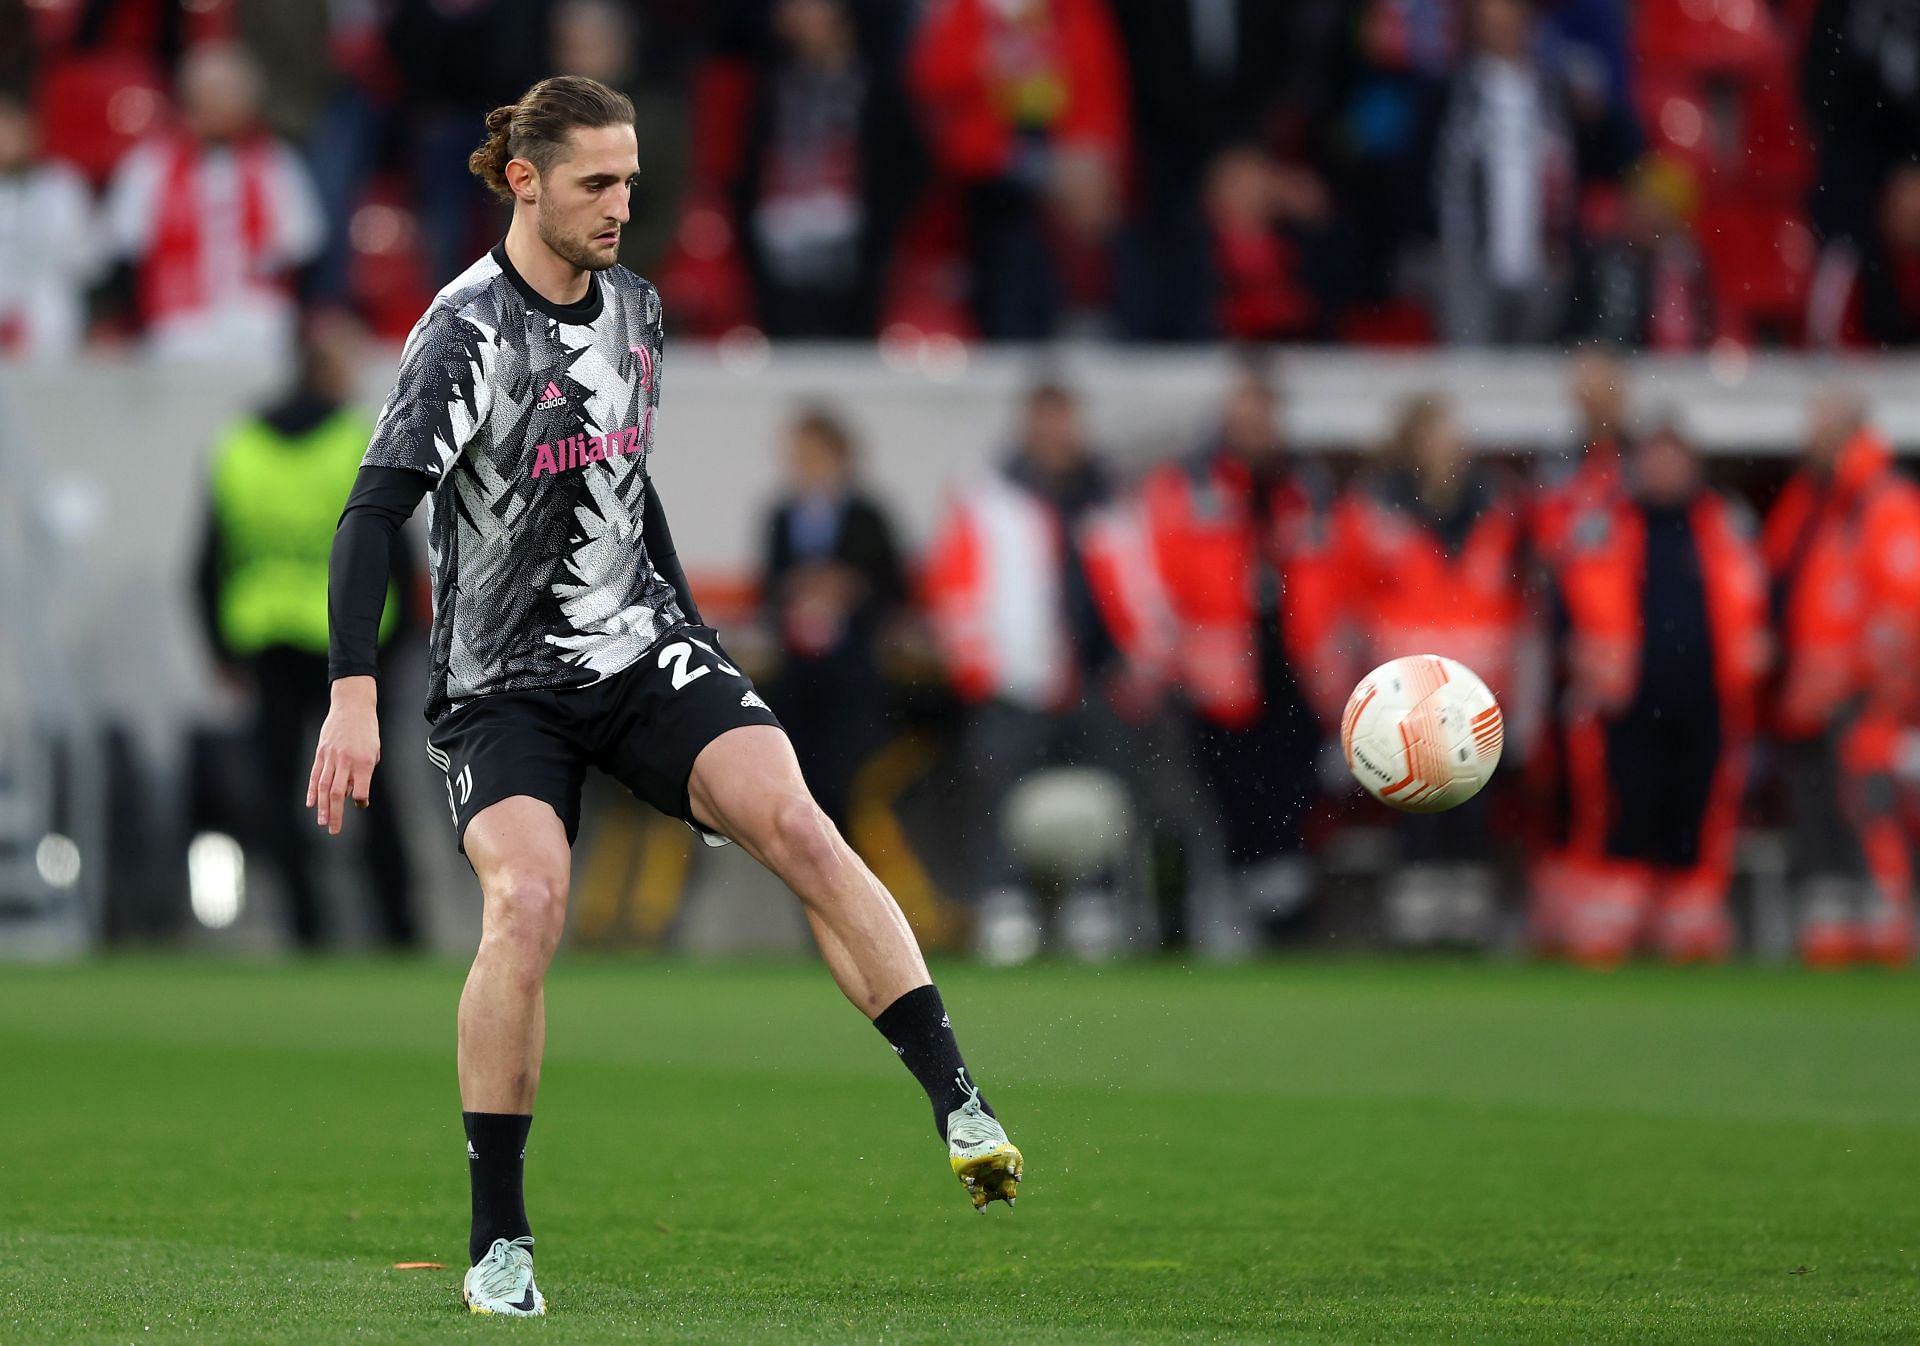 Adrien Rabiot has admirers at Old Trafford.